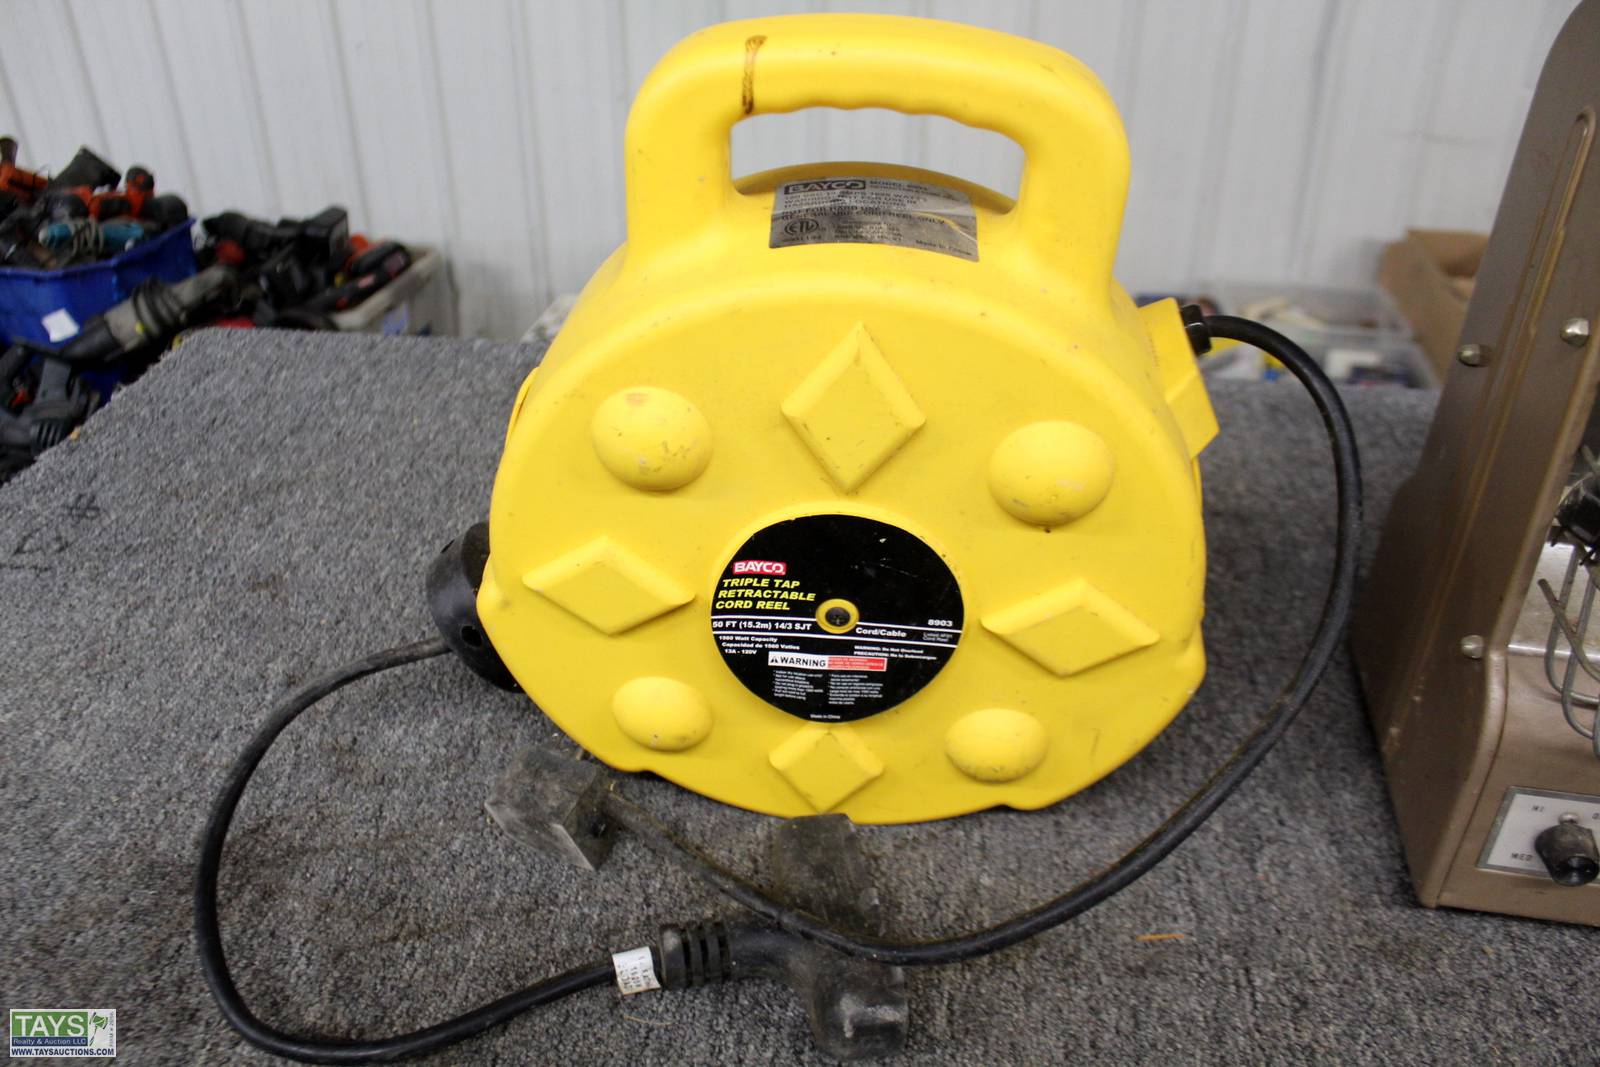 Tays Realty & Auction - Auction: ONLINE ABSOLUTE AUCTION: TRACTORS -  VEHICLES - TRAILERS - TOOLS - SHOP EQUIPMENT ITEM: Ryobi Triple Tap  Retractable Cord Reel & Markel Heater